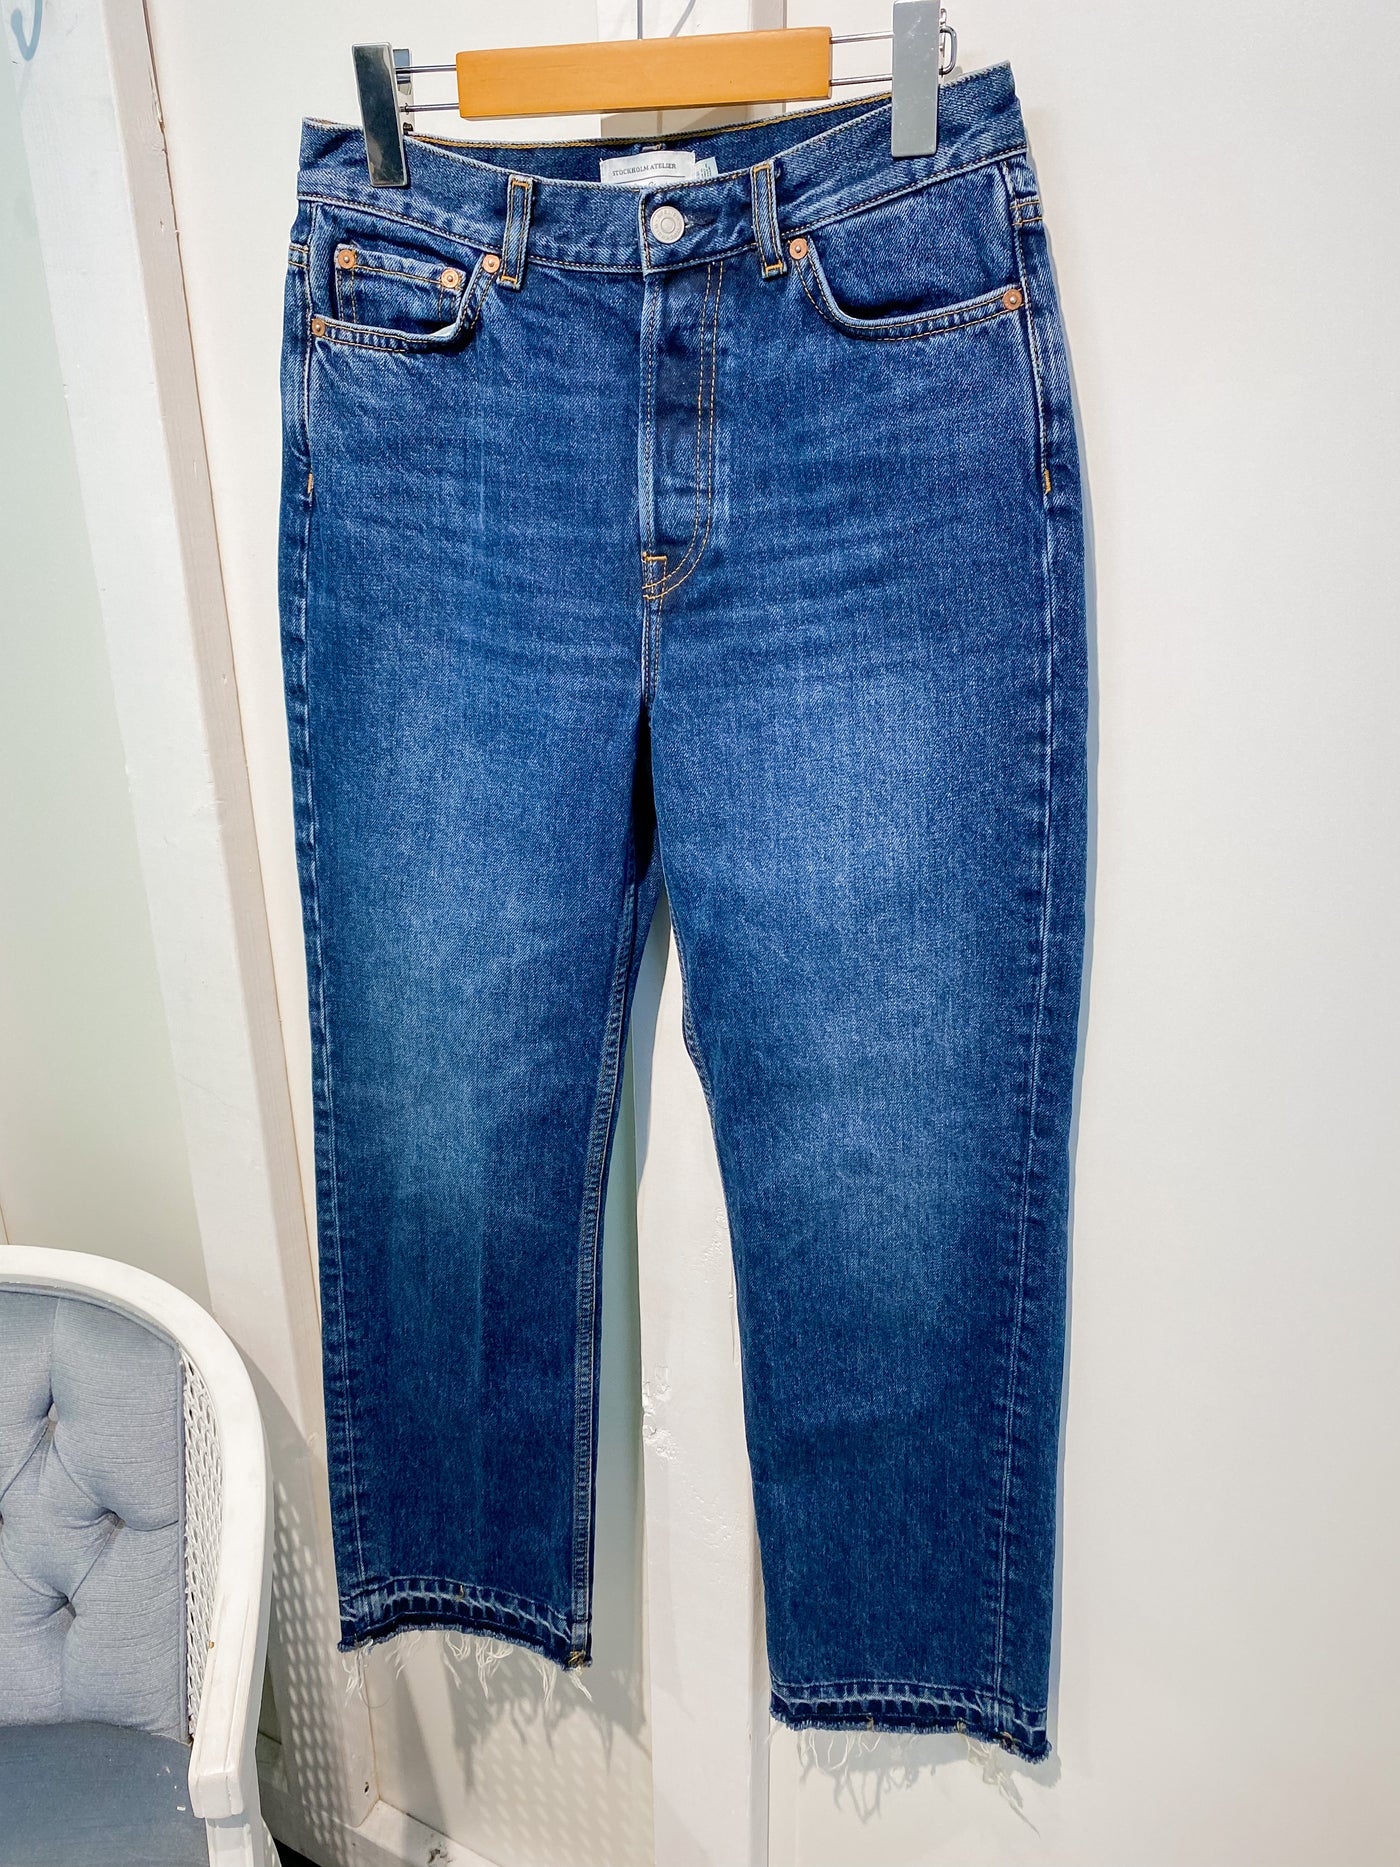 Dark wash jeans with frayed bottoms